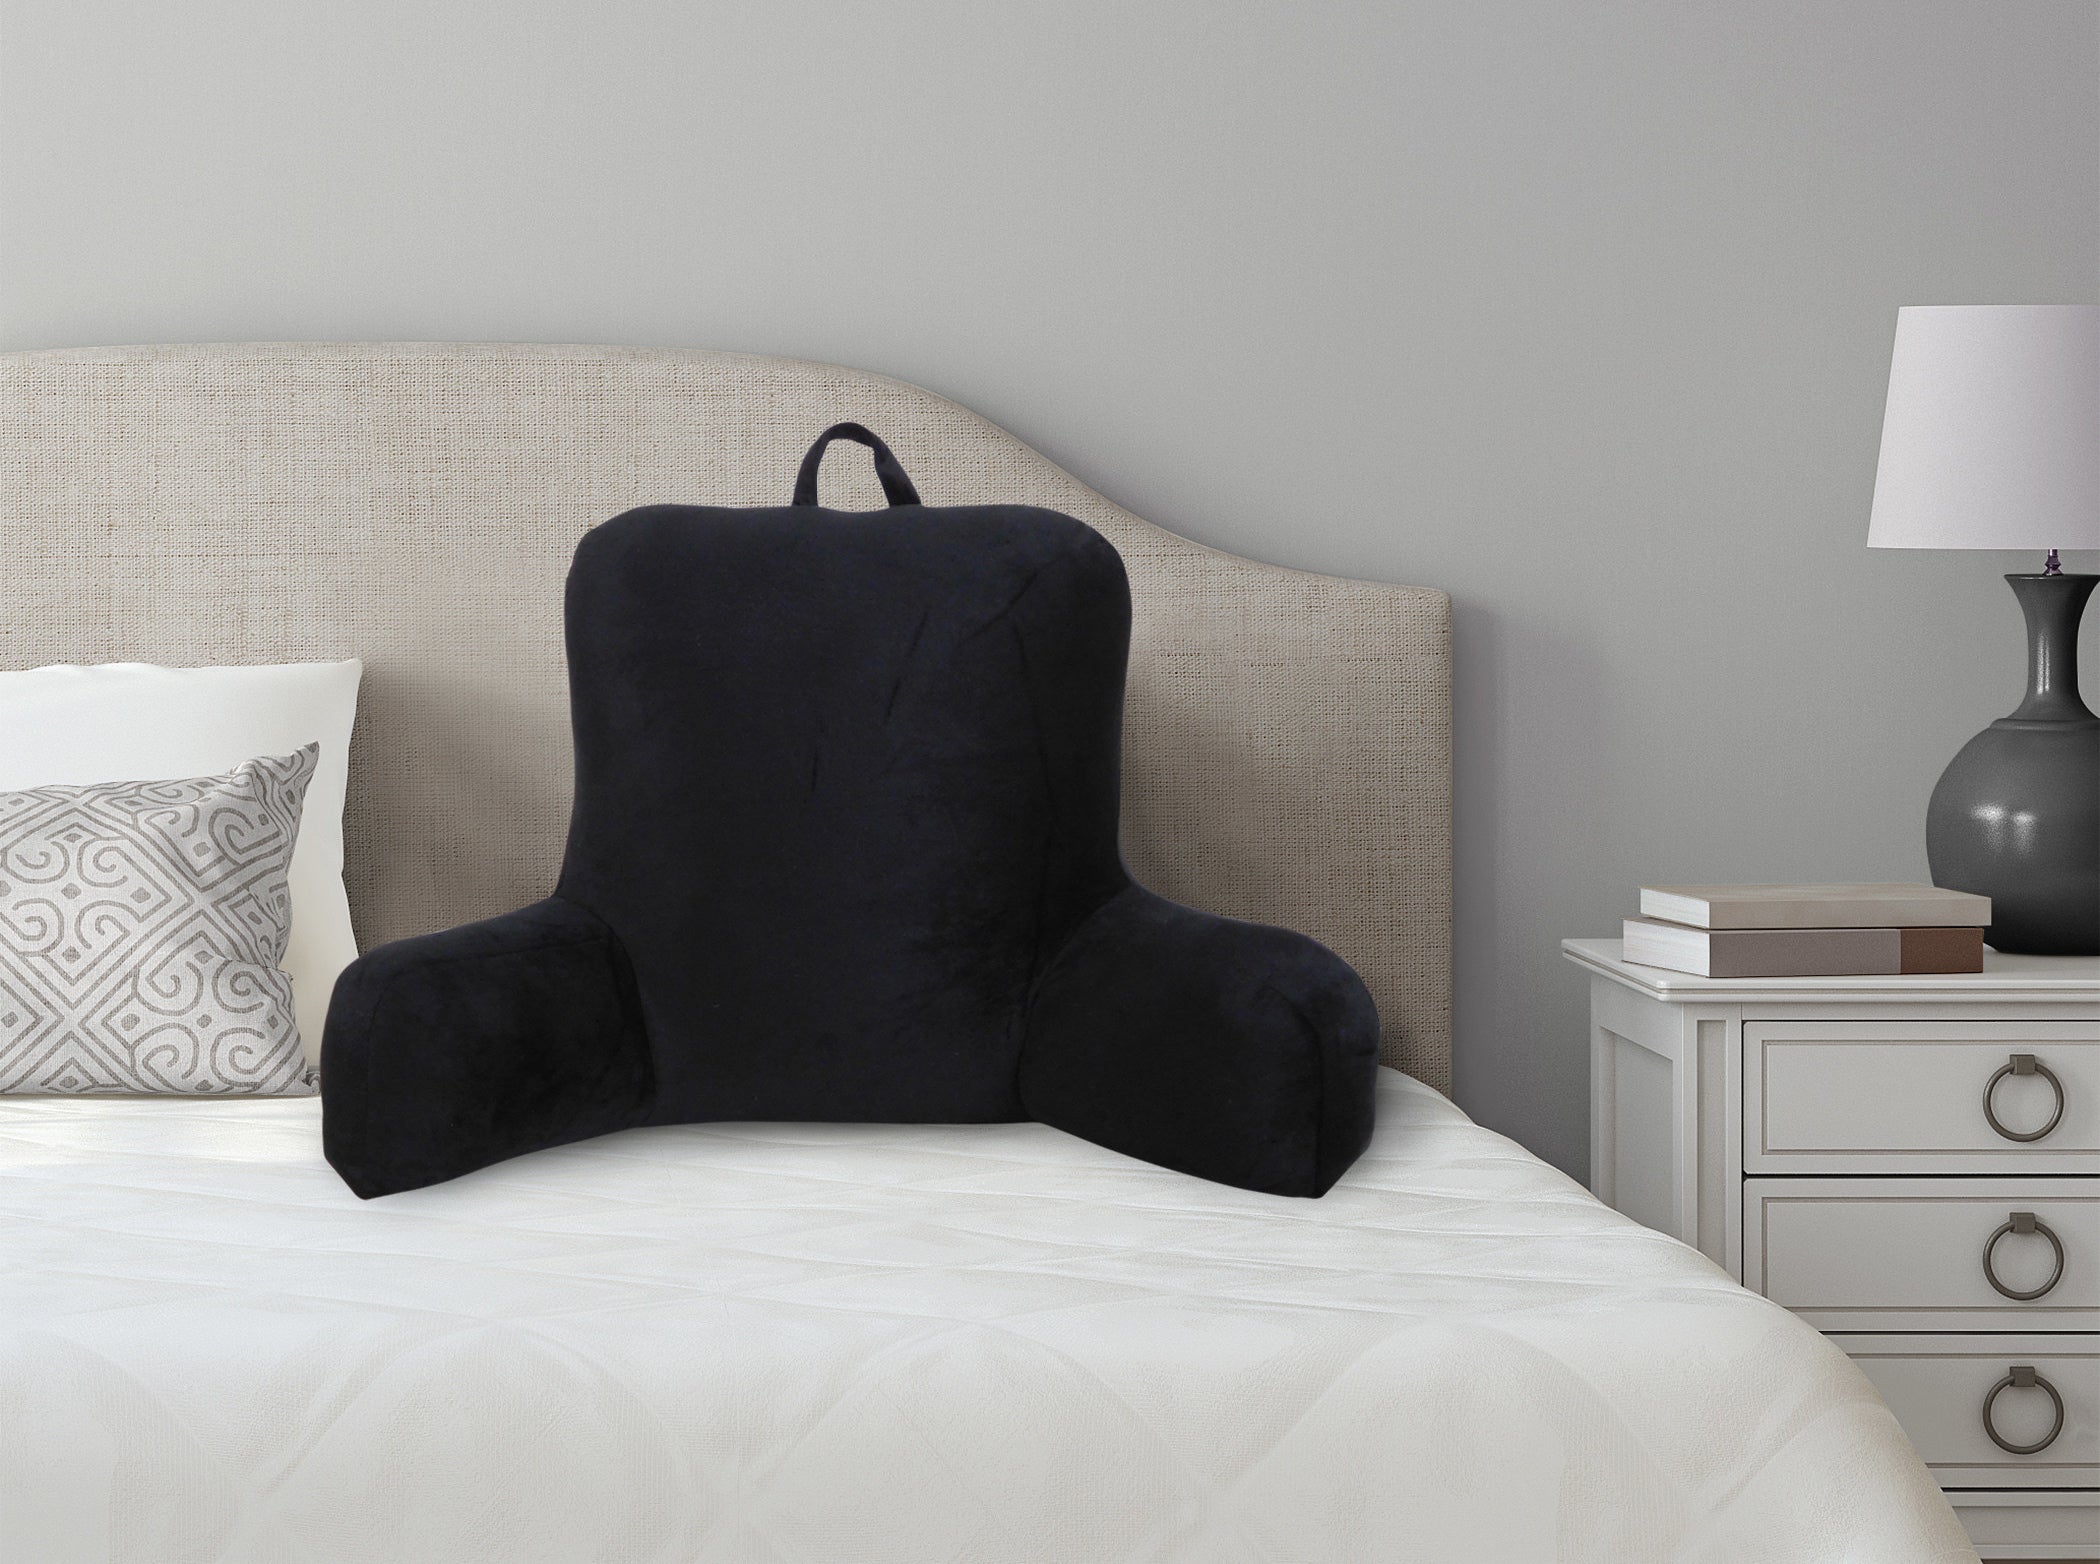 black lounger pillow on a bed